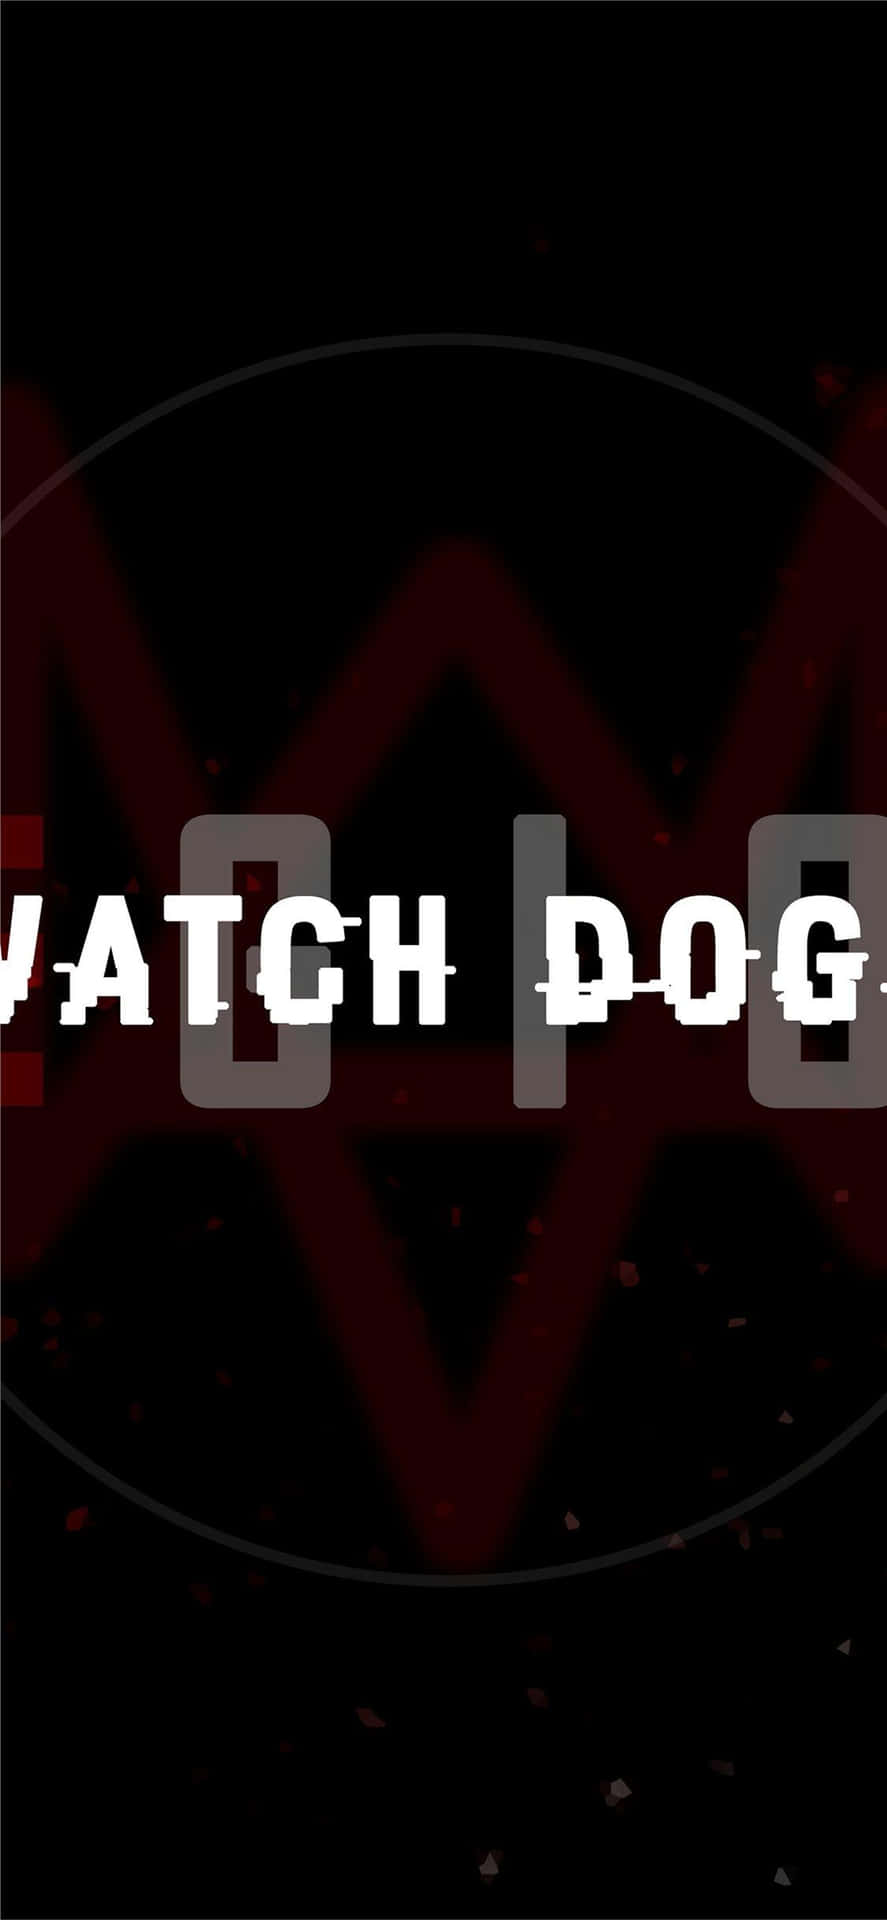 Watchdogs Iphone Minimalist Would Be Translated To 